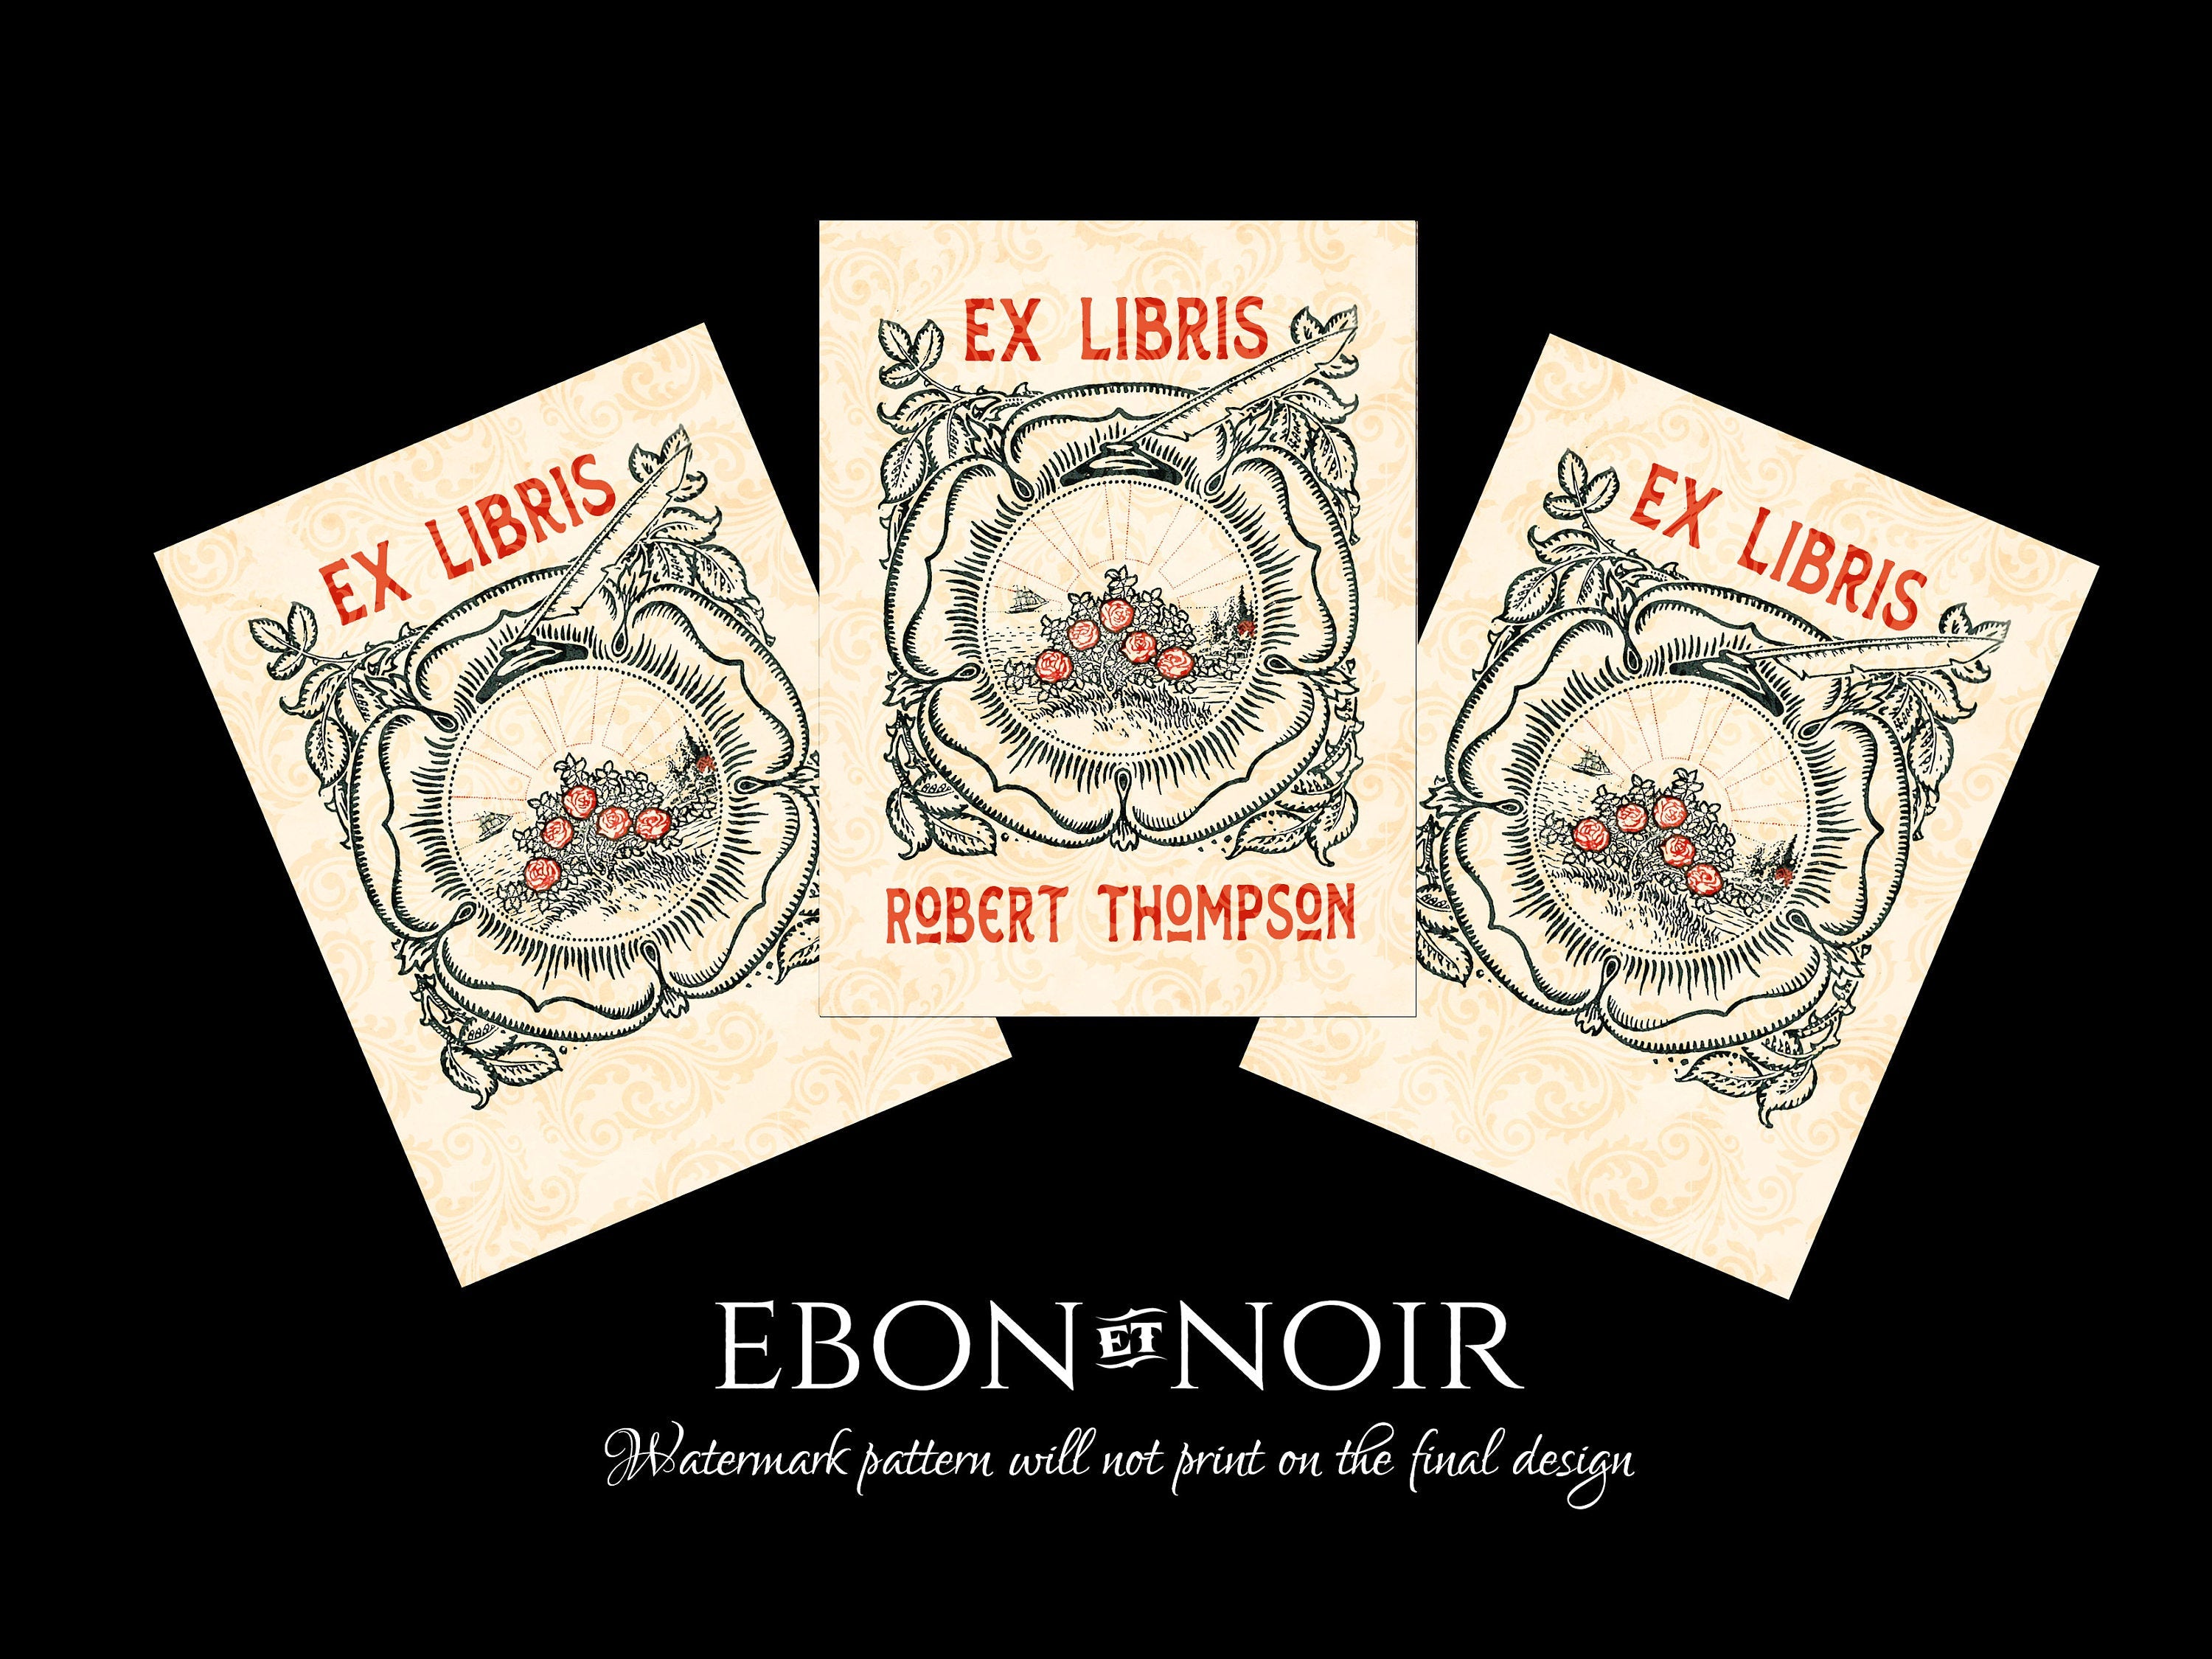 Sub Rosa, Personalized Ex-Libris Bookplates, Crafted on Traditional Gummed Paper, 3in x 4in, Set of 30